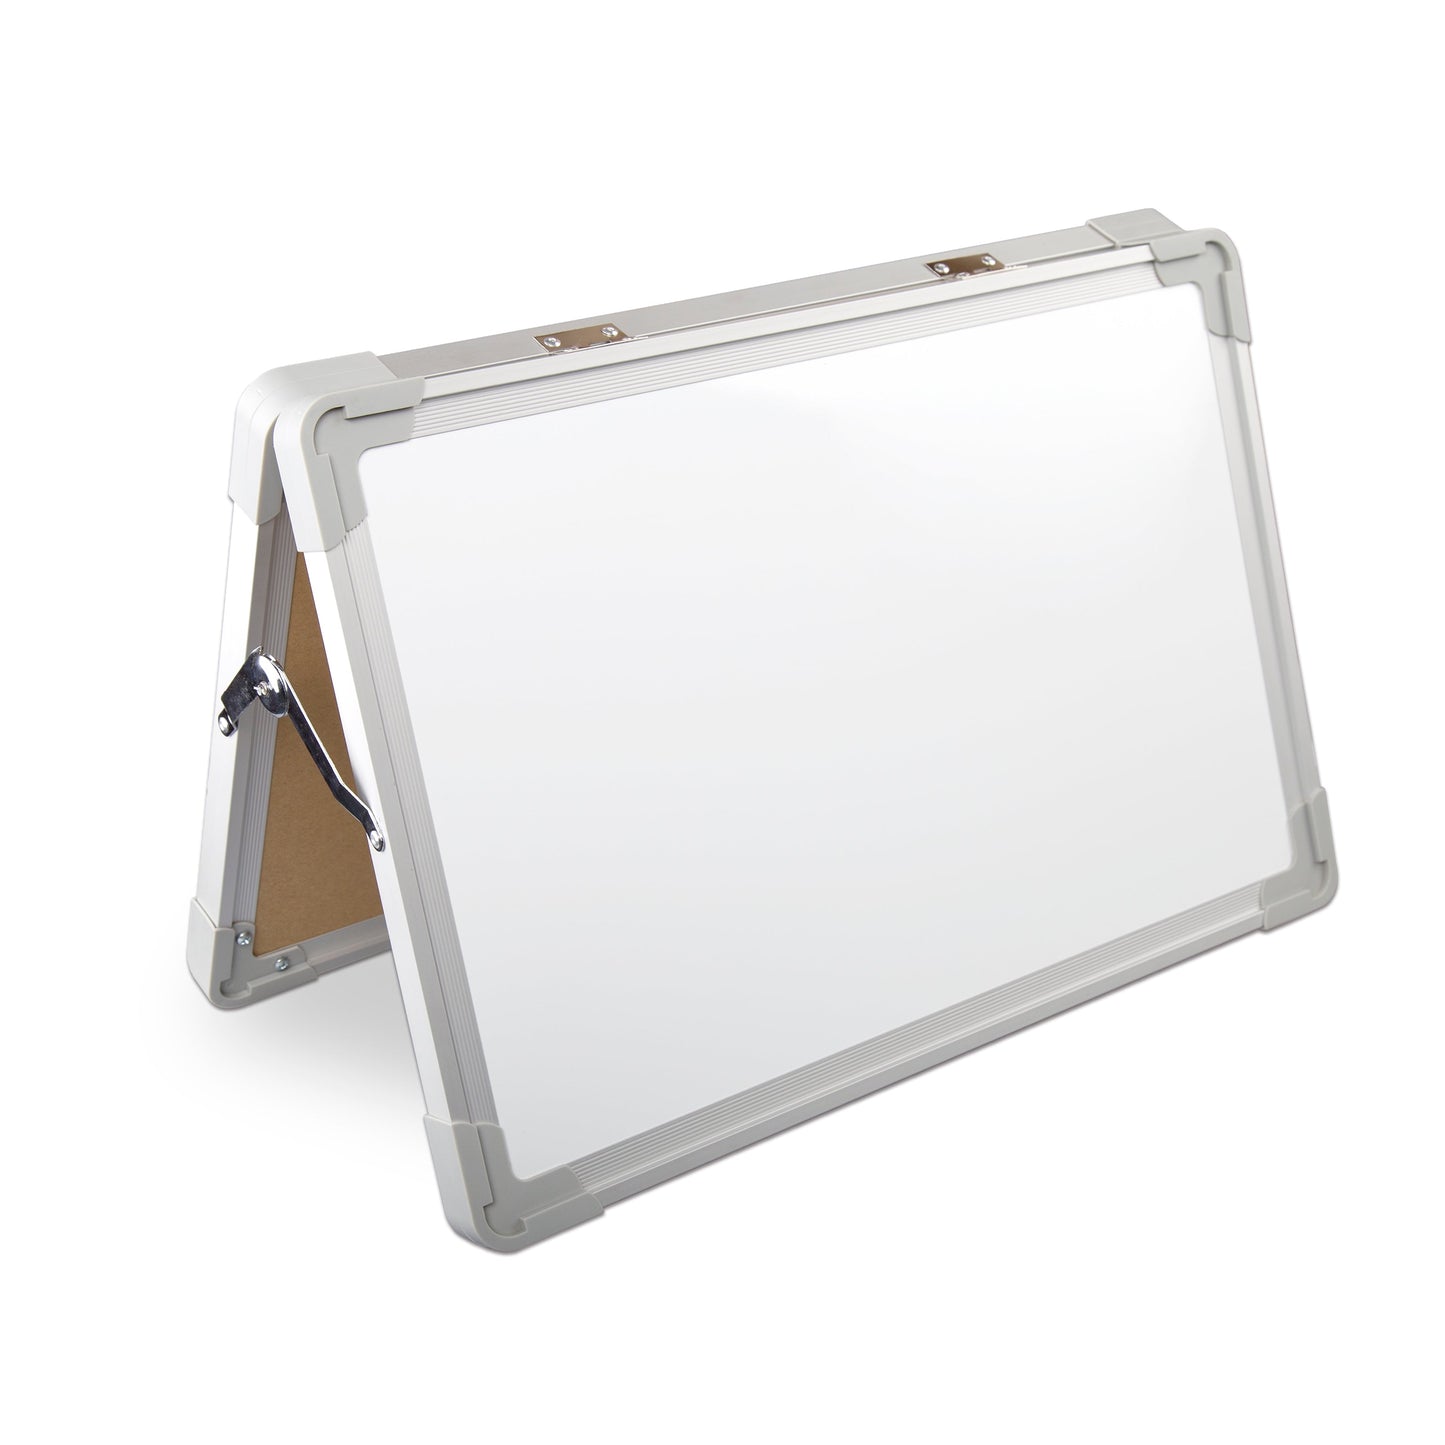 M21 Foldable Magnetic Dry Erase Board, Factory Wholesale Portable Whiteboard Double Sided Desktop Board Customized - Premium dry erase lapboard from Madic Whiteboard - Madic Whiteboard